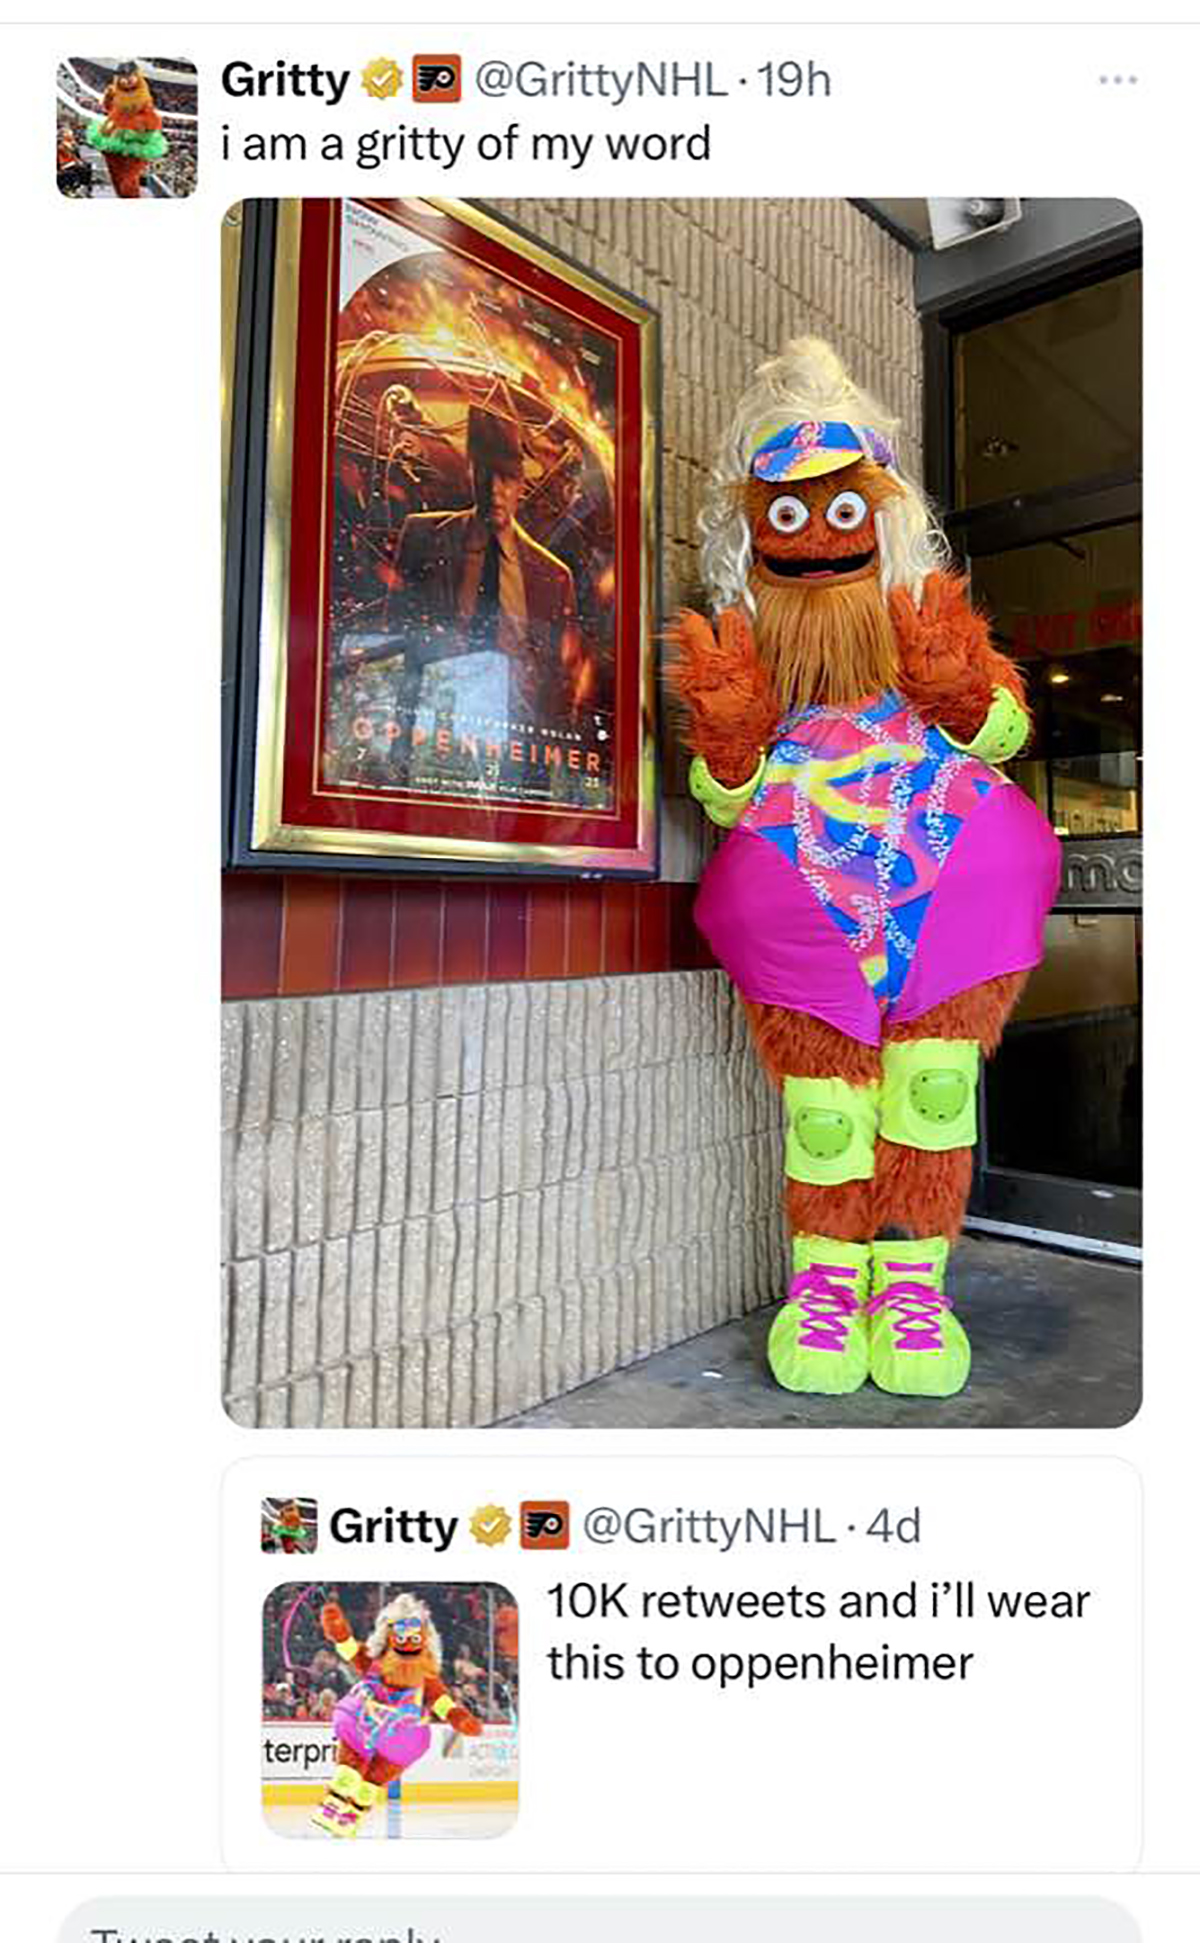 dank memes - action figure - Gritty i am a gritty of my word Doodt terpri Tox Gritty Nhl4d 10K and i'll wear this to oppenheimer